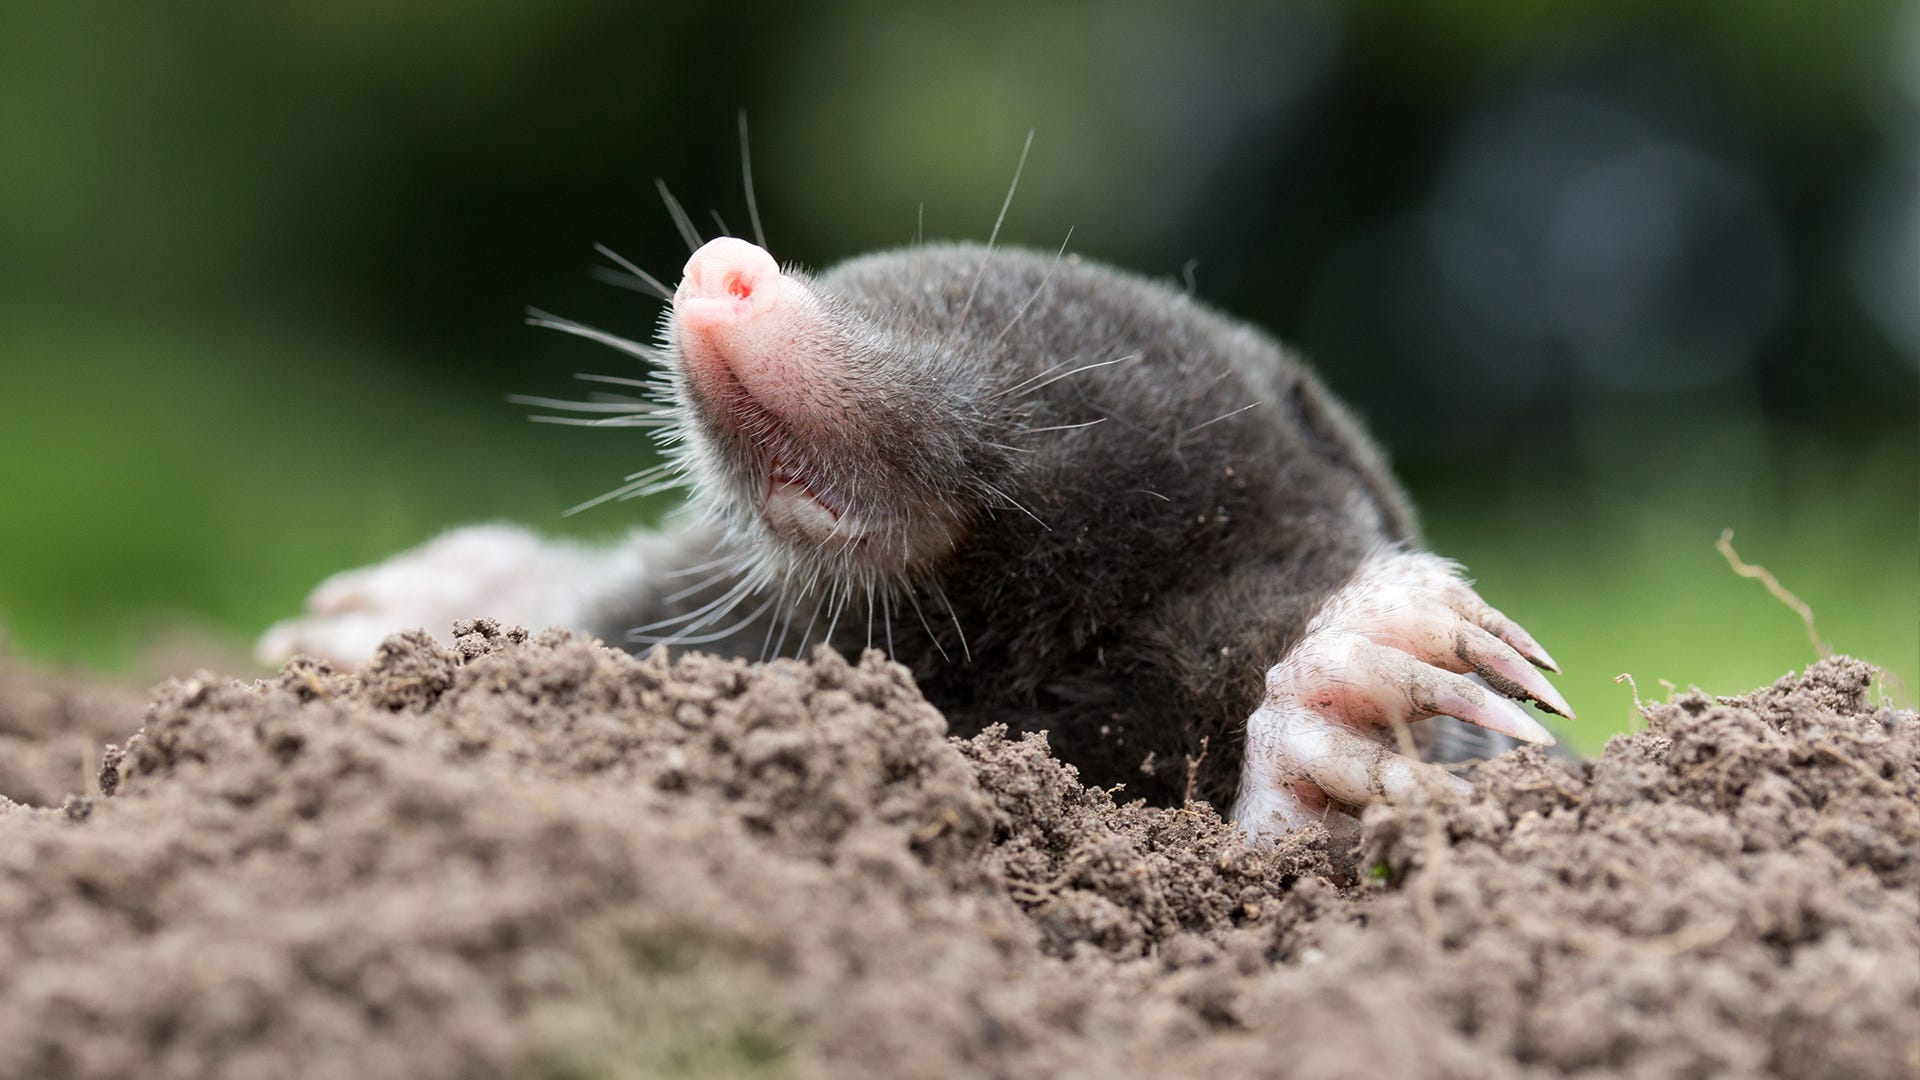 Is There A Way To Tell If A Mole Is Blind?